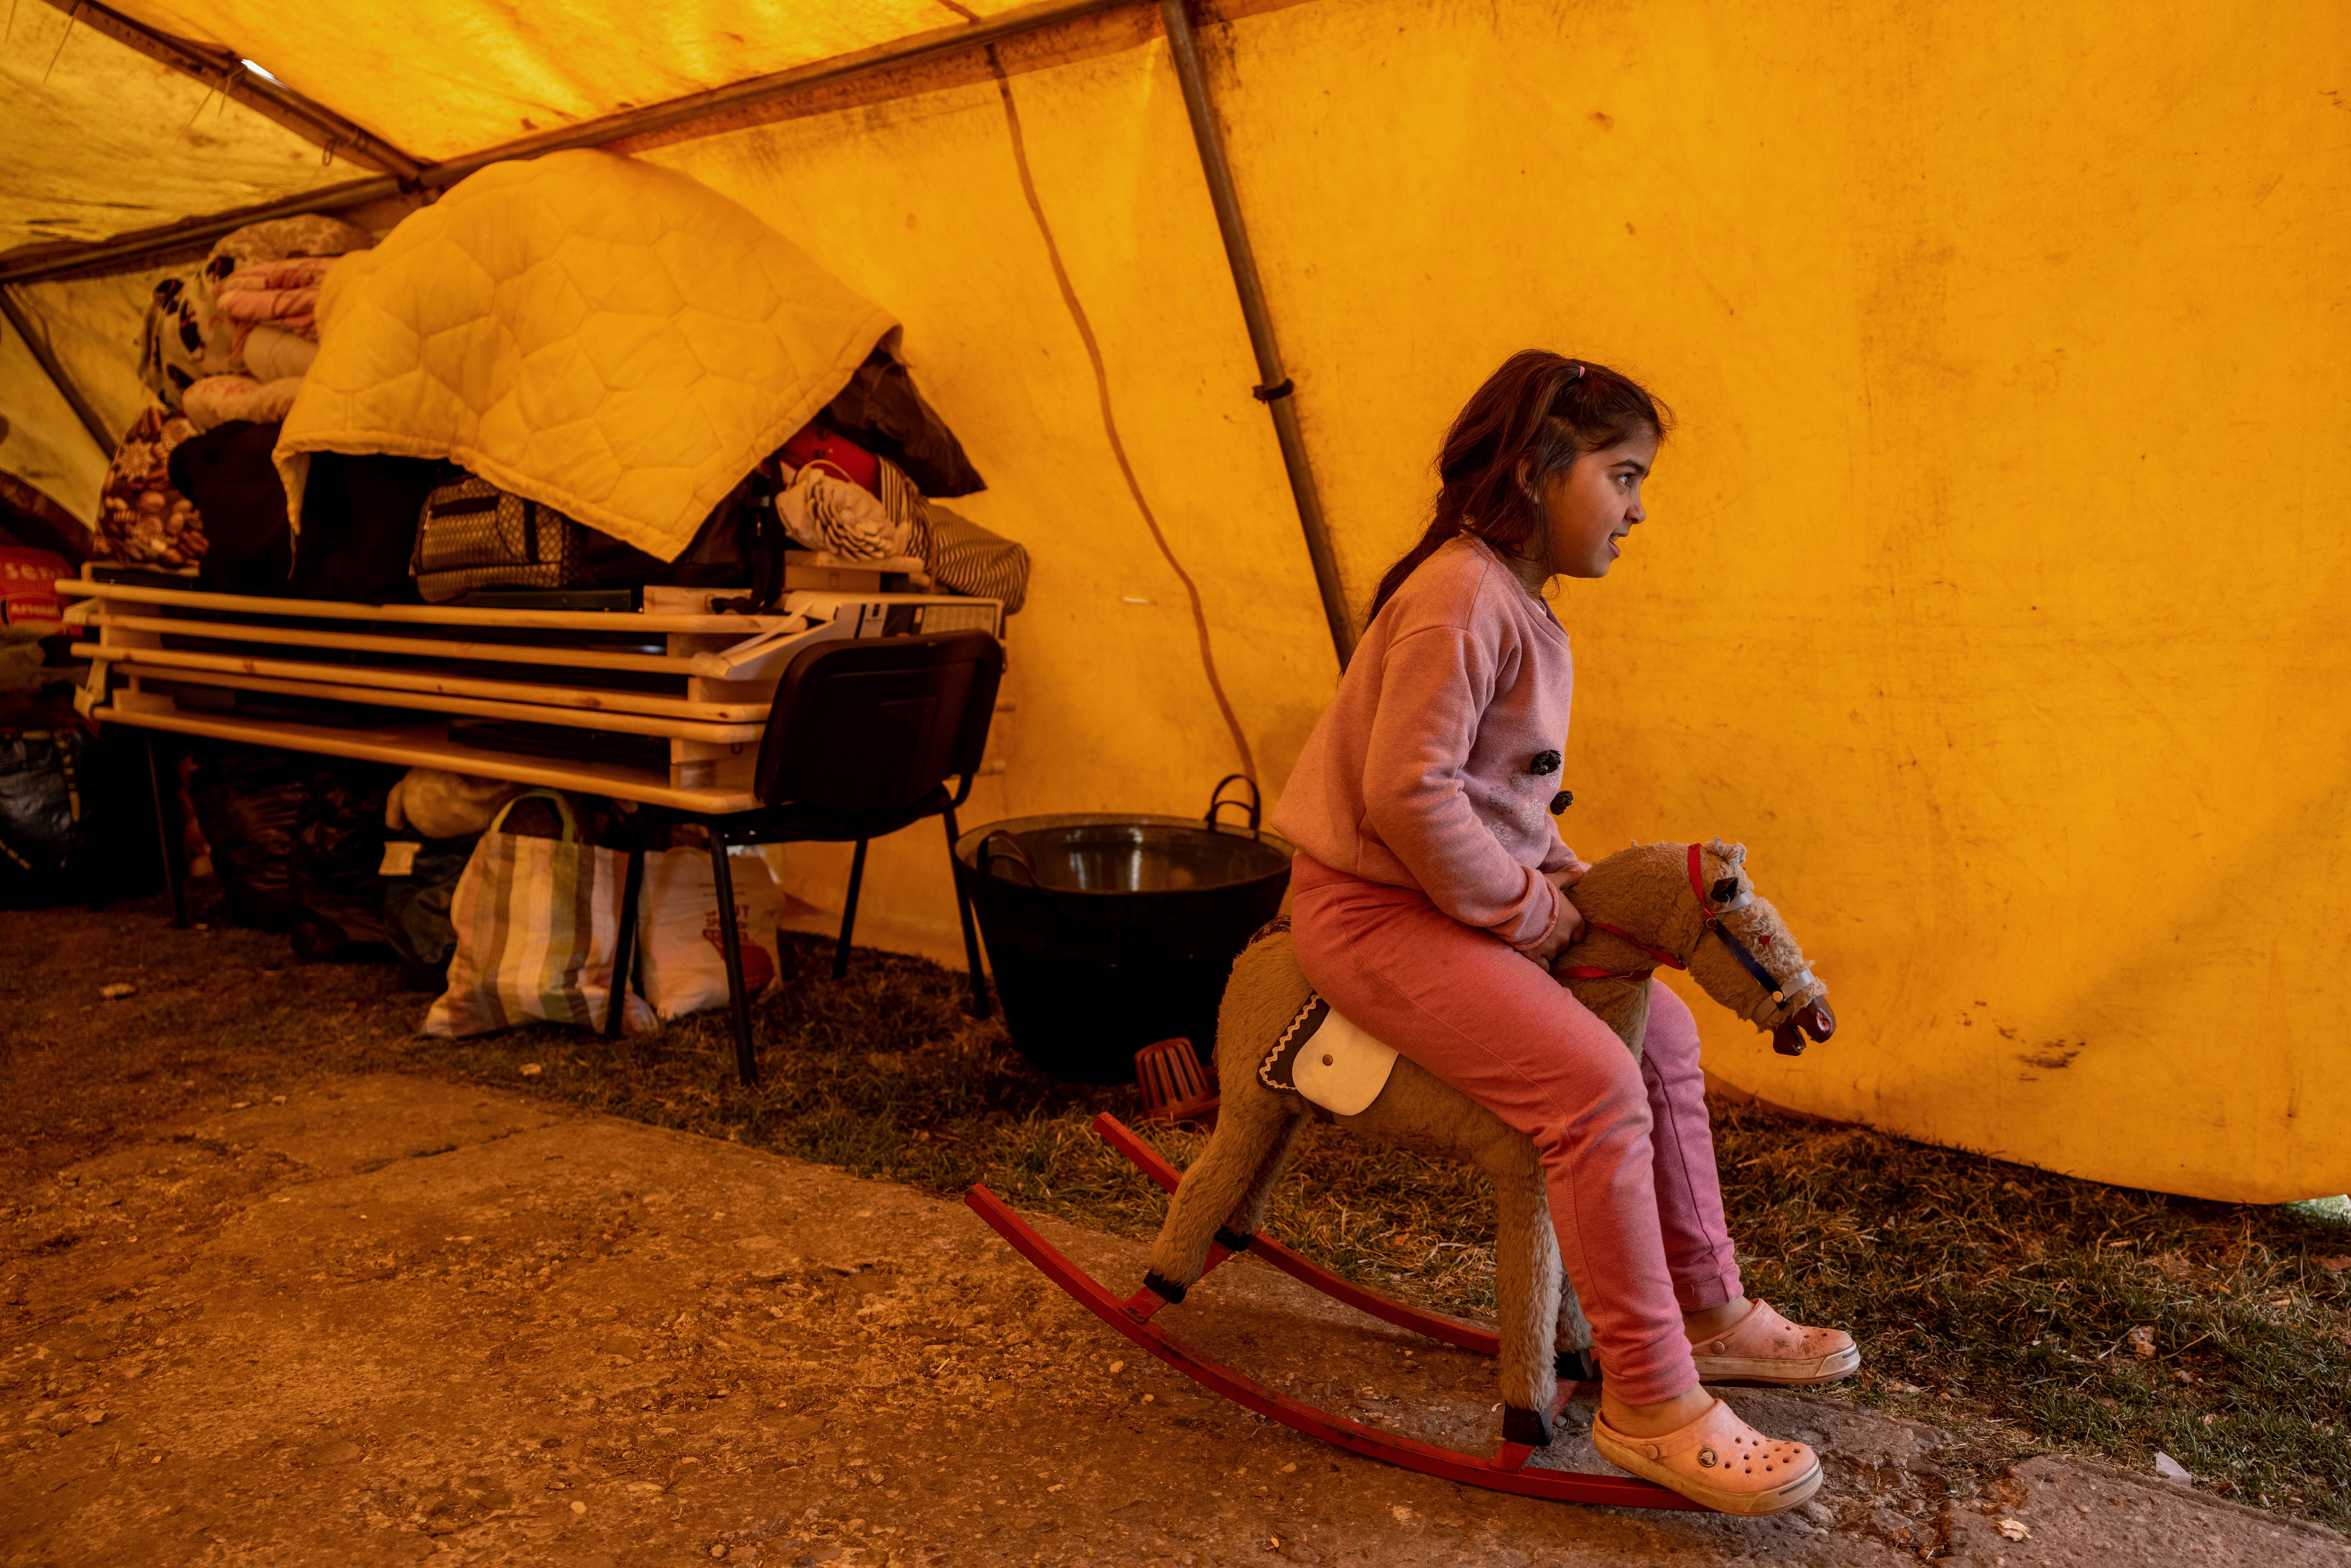 A refugee girl sit on a swing horse in a temporary shelter offered by the Free Christian Church in Uszka, Hungary